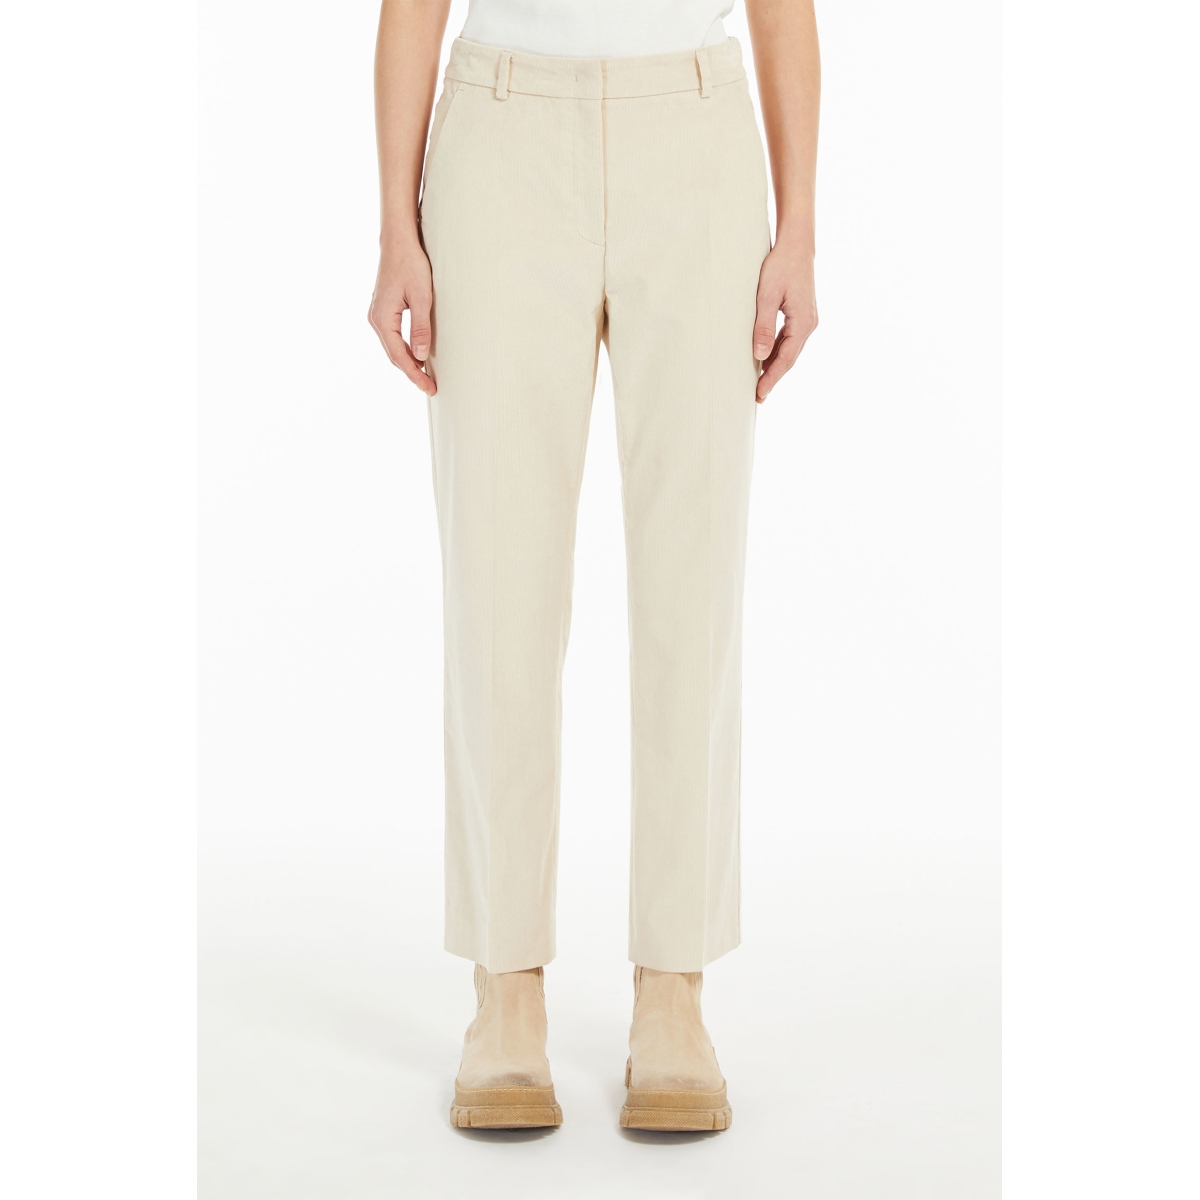 Max Mara ivory corduroy flared pants for women Size 36 Couleur 5